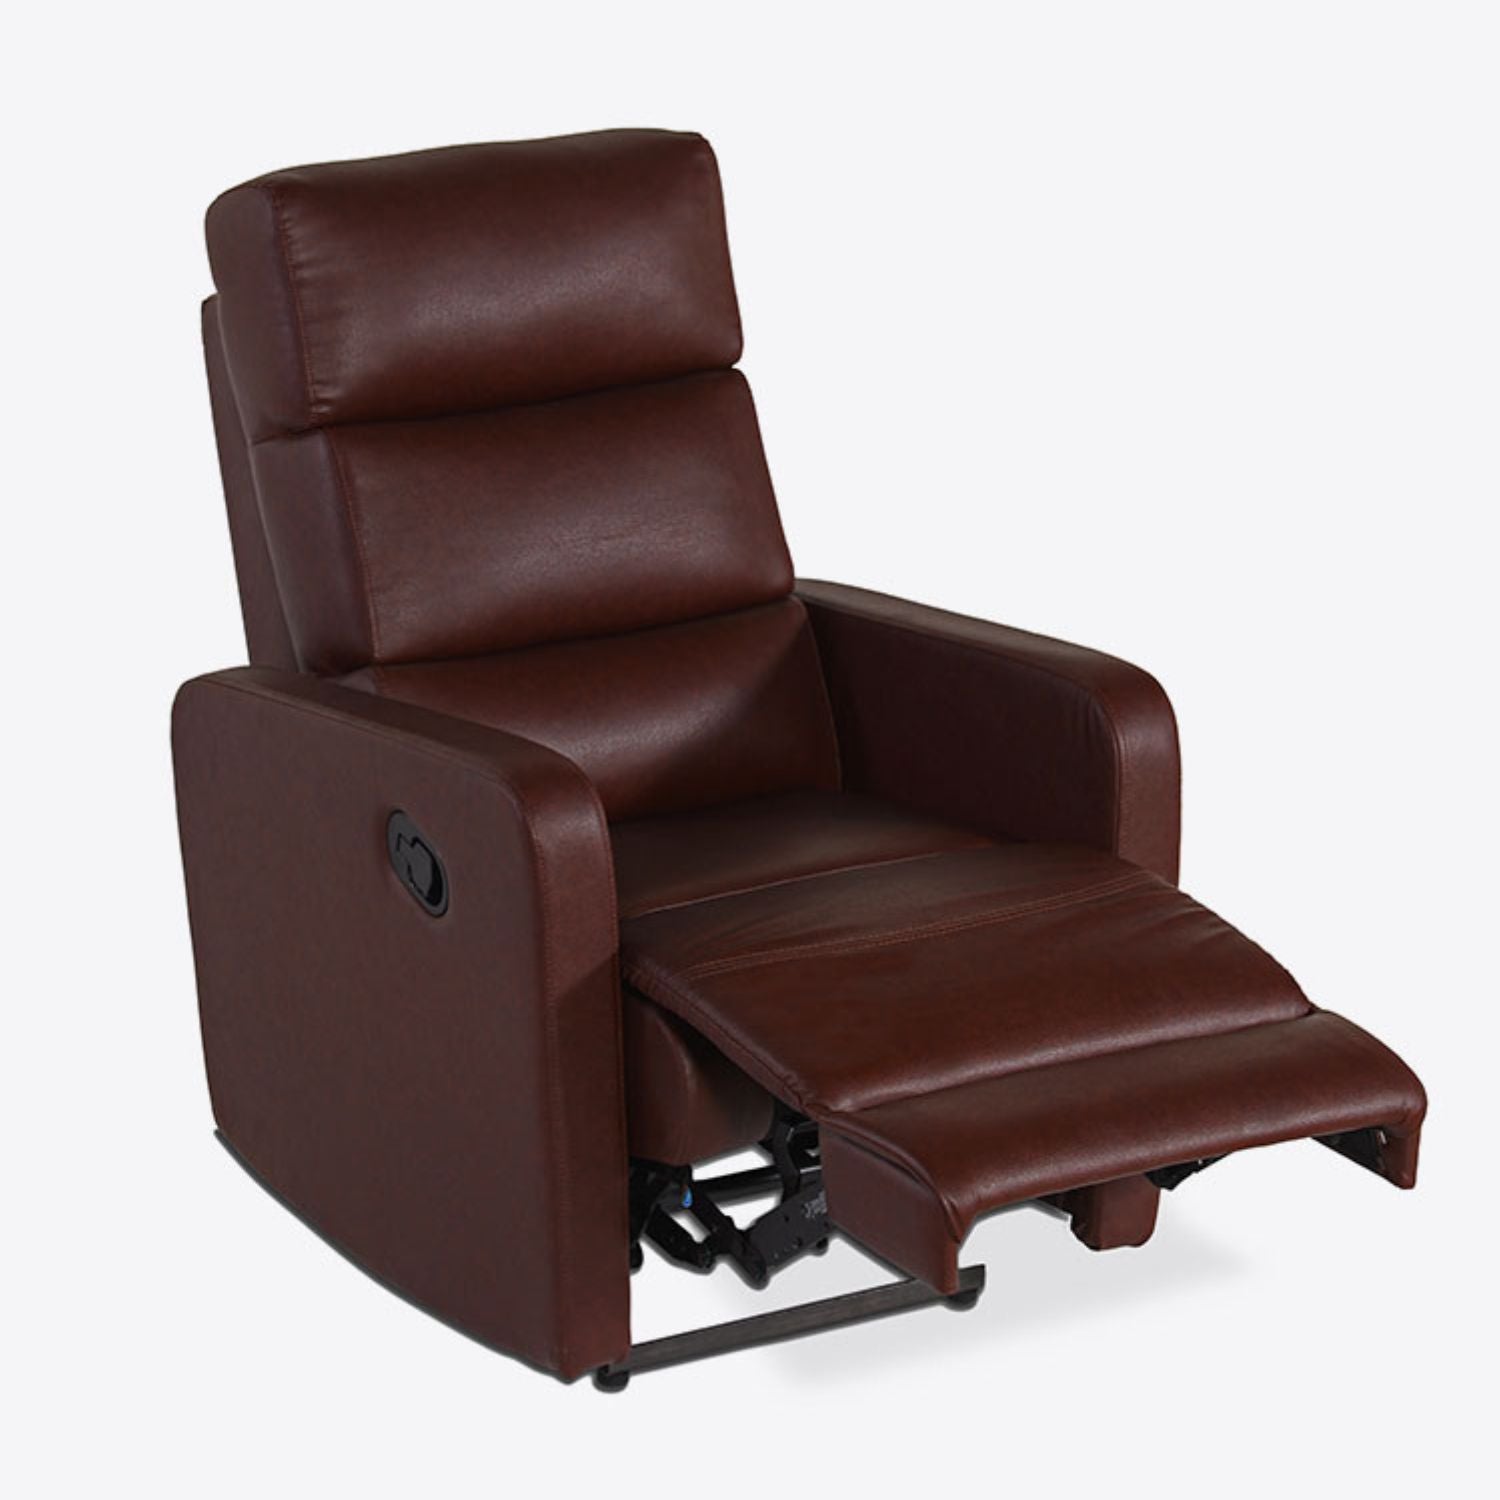 220 RECLINER CHAIR Recliners India